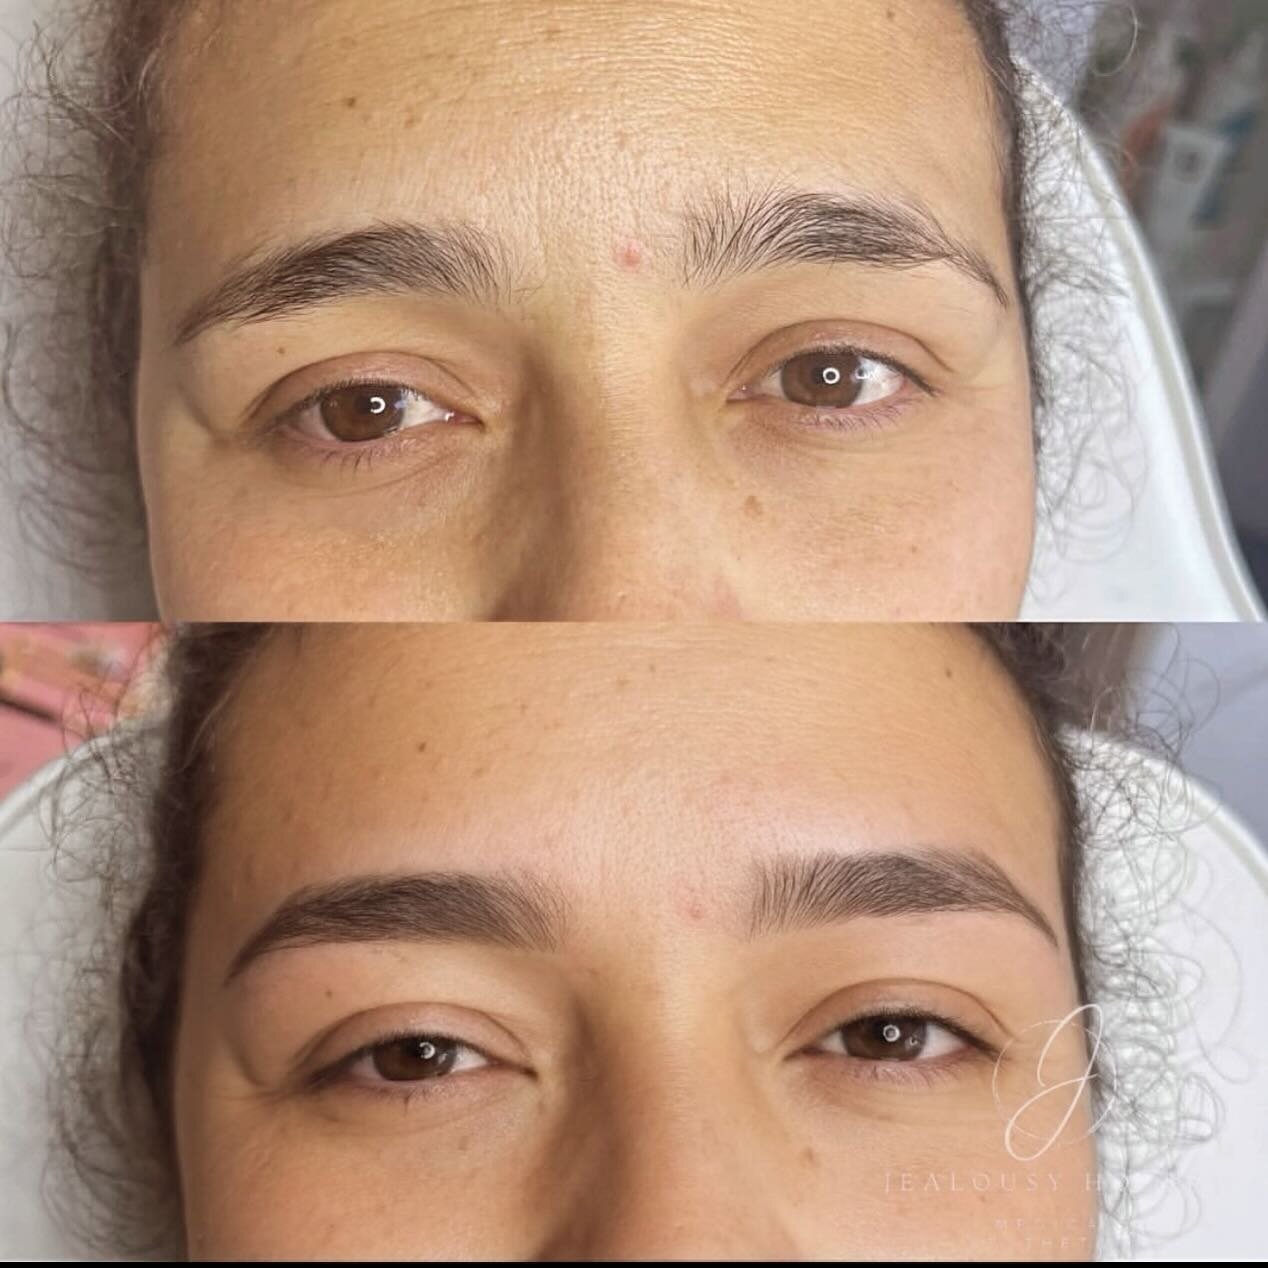 Elevate your gaze with the magic of Henna Brow and expert shaping! 👁️✨ 

Transform your eyes, frame your face, and enjoy the artistry at Jealousy House. 

Book now for our Henna Brow session and receive a soothing Jelly Brow Mask &ndash; because you